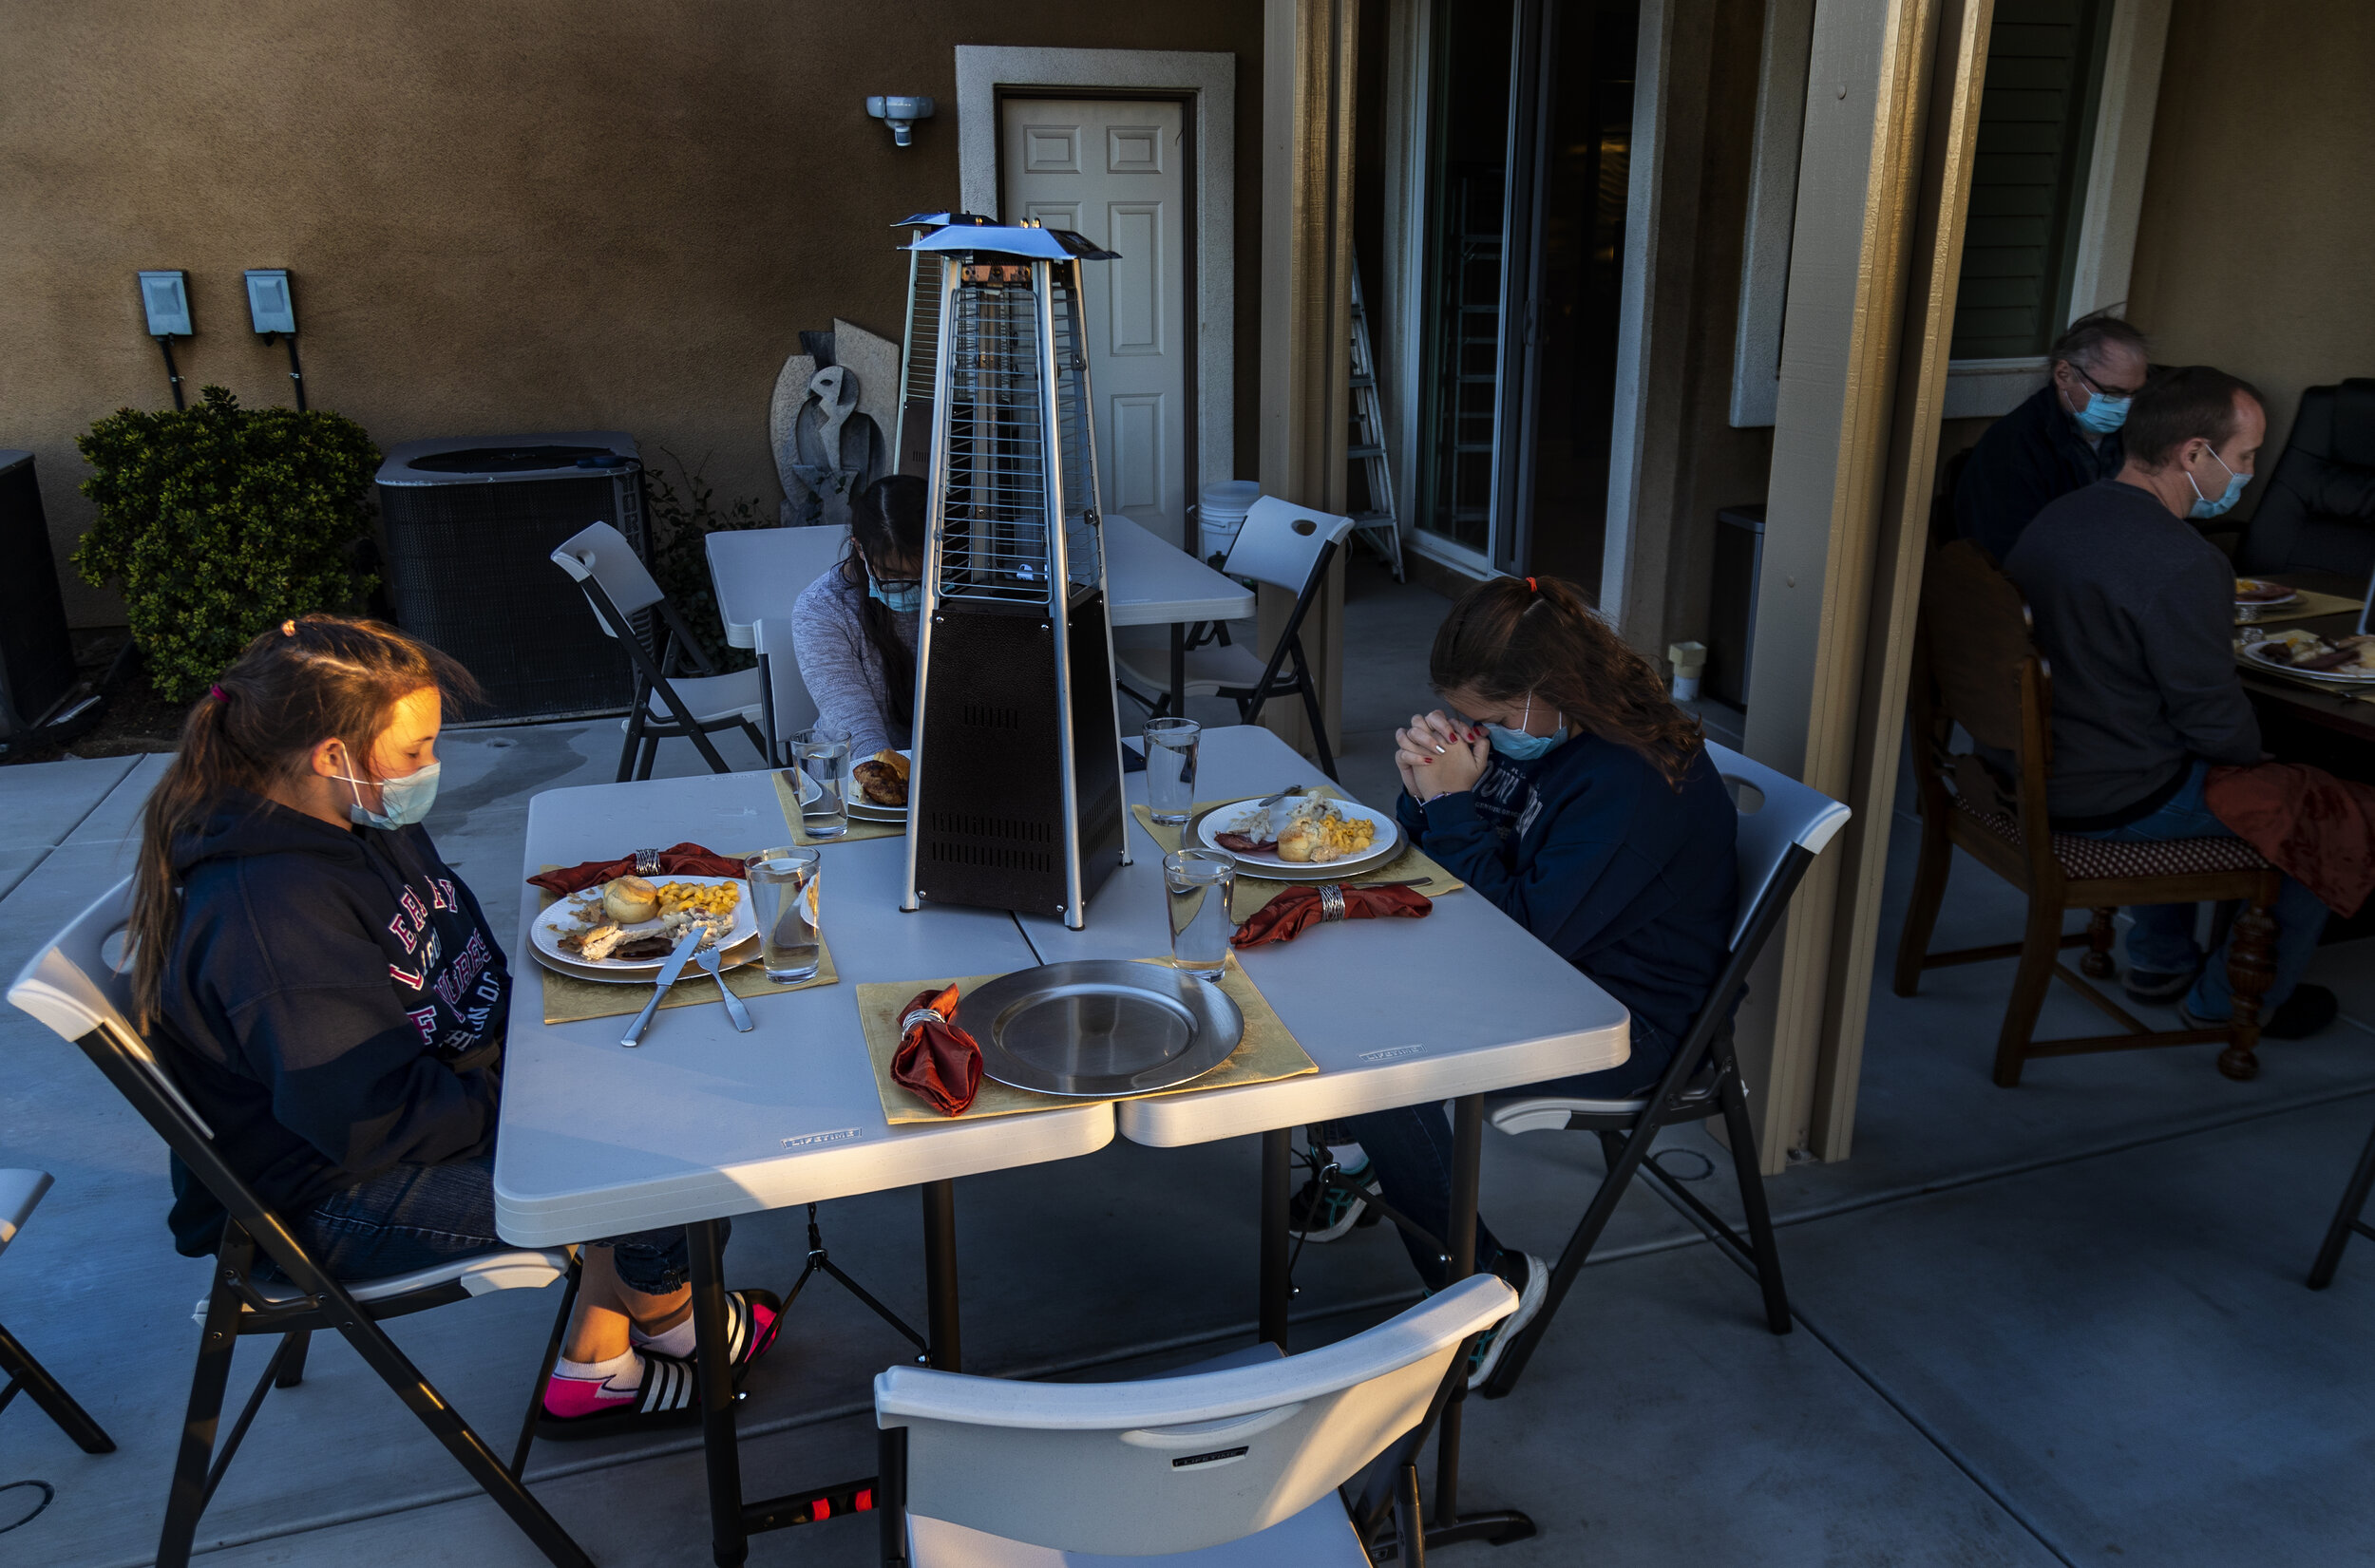  RIVERSIDE, CA - NOVEMBER 26, 2020:  Wearing a mask Dalilah Stoye,13, left, leads the family in a blessing before eating their Thanksgiving feast on November 26, 2020 in Riverside, California. Despite windy conditions, the families still ate outside 